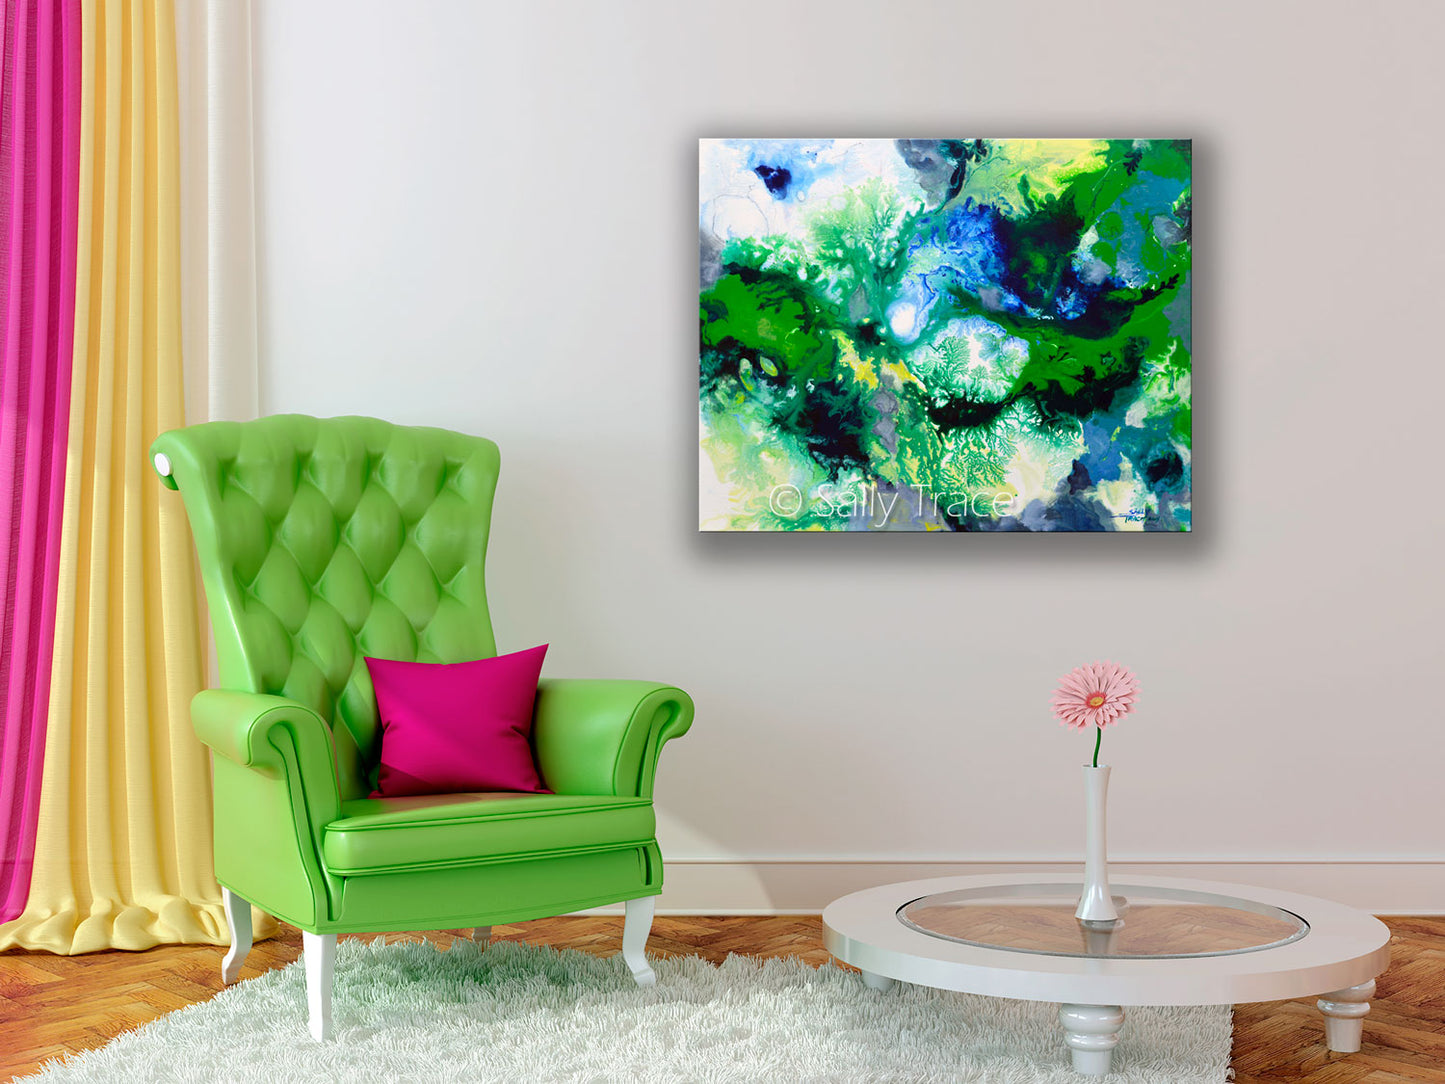 Giclee prints on cavnas from the origianl fluid art fine art painting by Sally Trace. Contemporary art for sale for the living roon, dining room, bedroom, room view